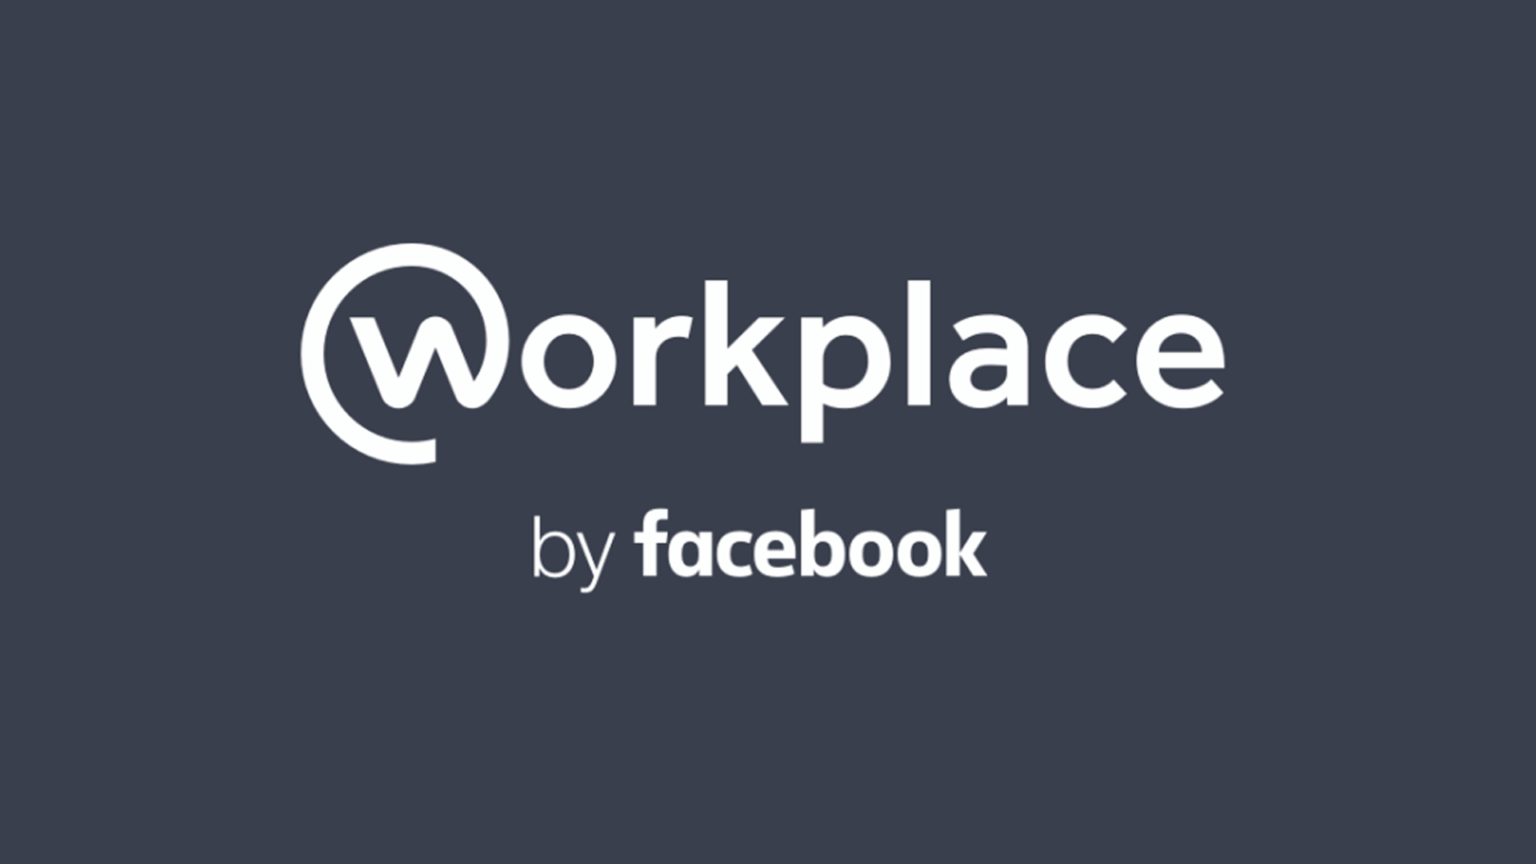 Send messages through notification to facebook & workplace users without getting blocked